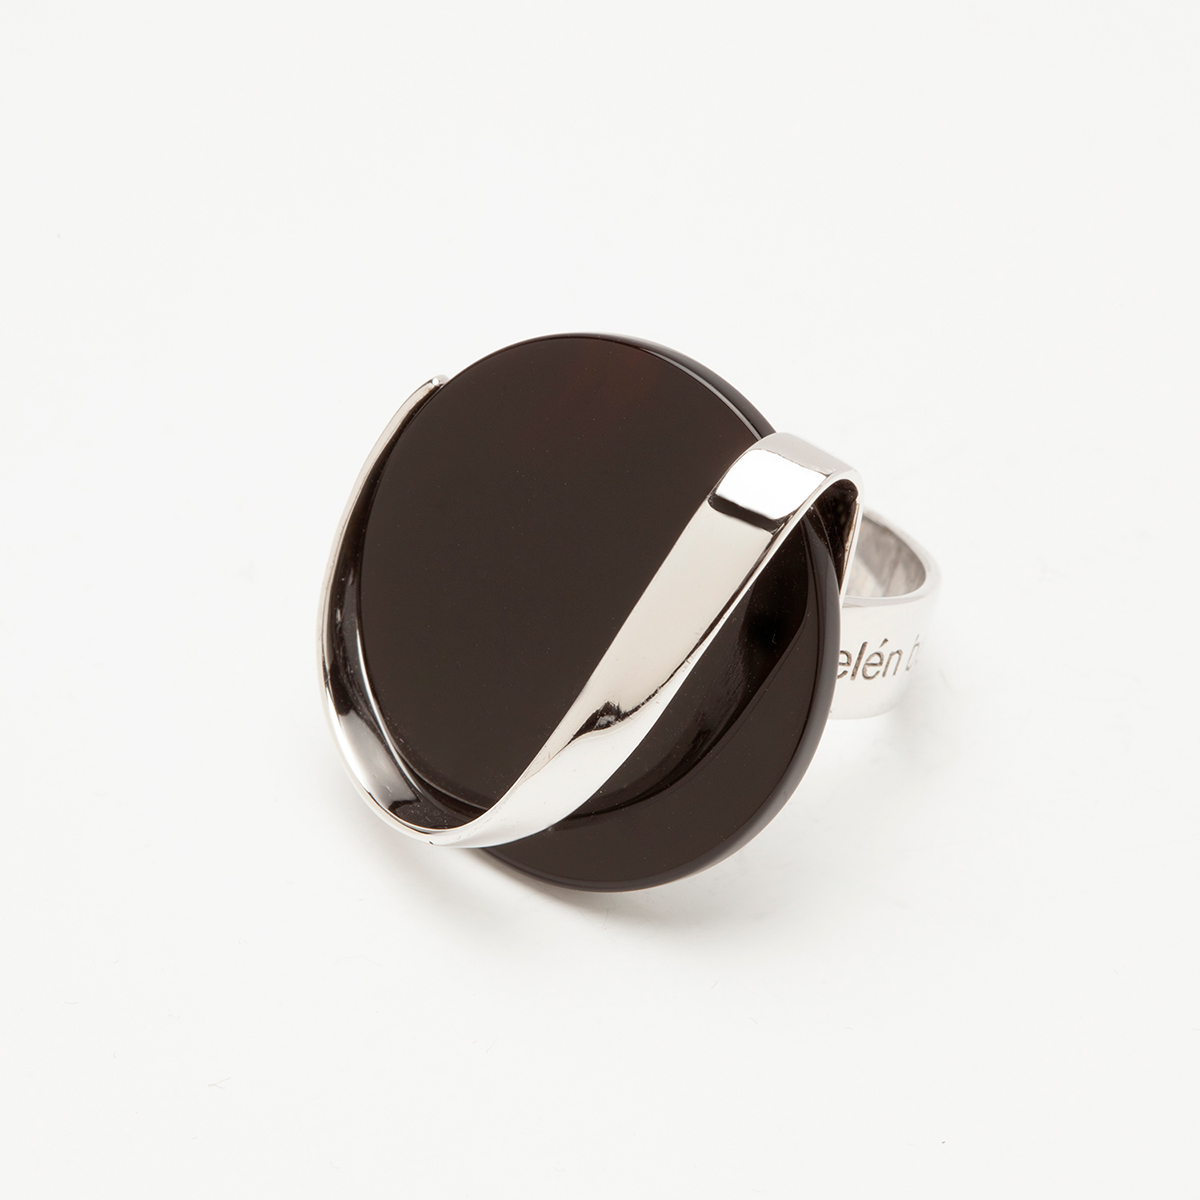 Sue handmade sterling silver and onyx ring 1 designed by Belen Bajo